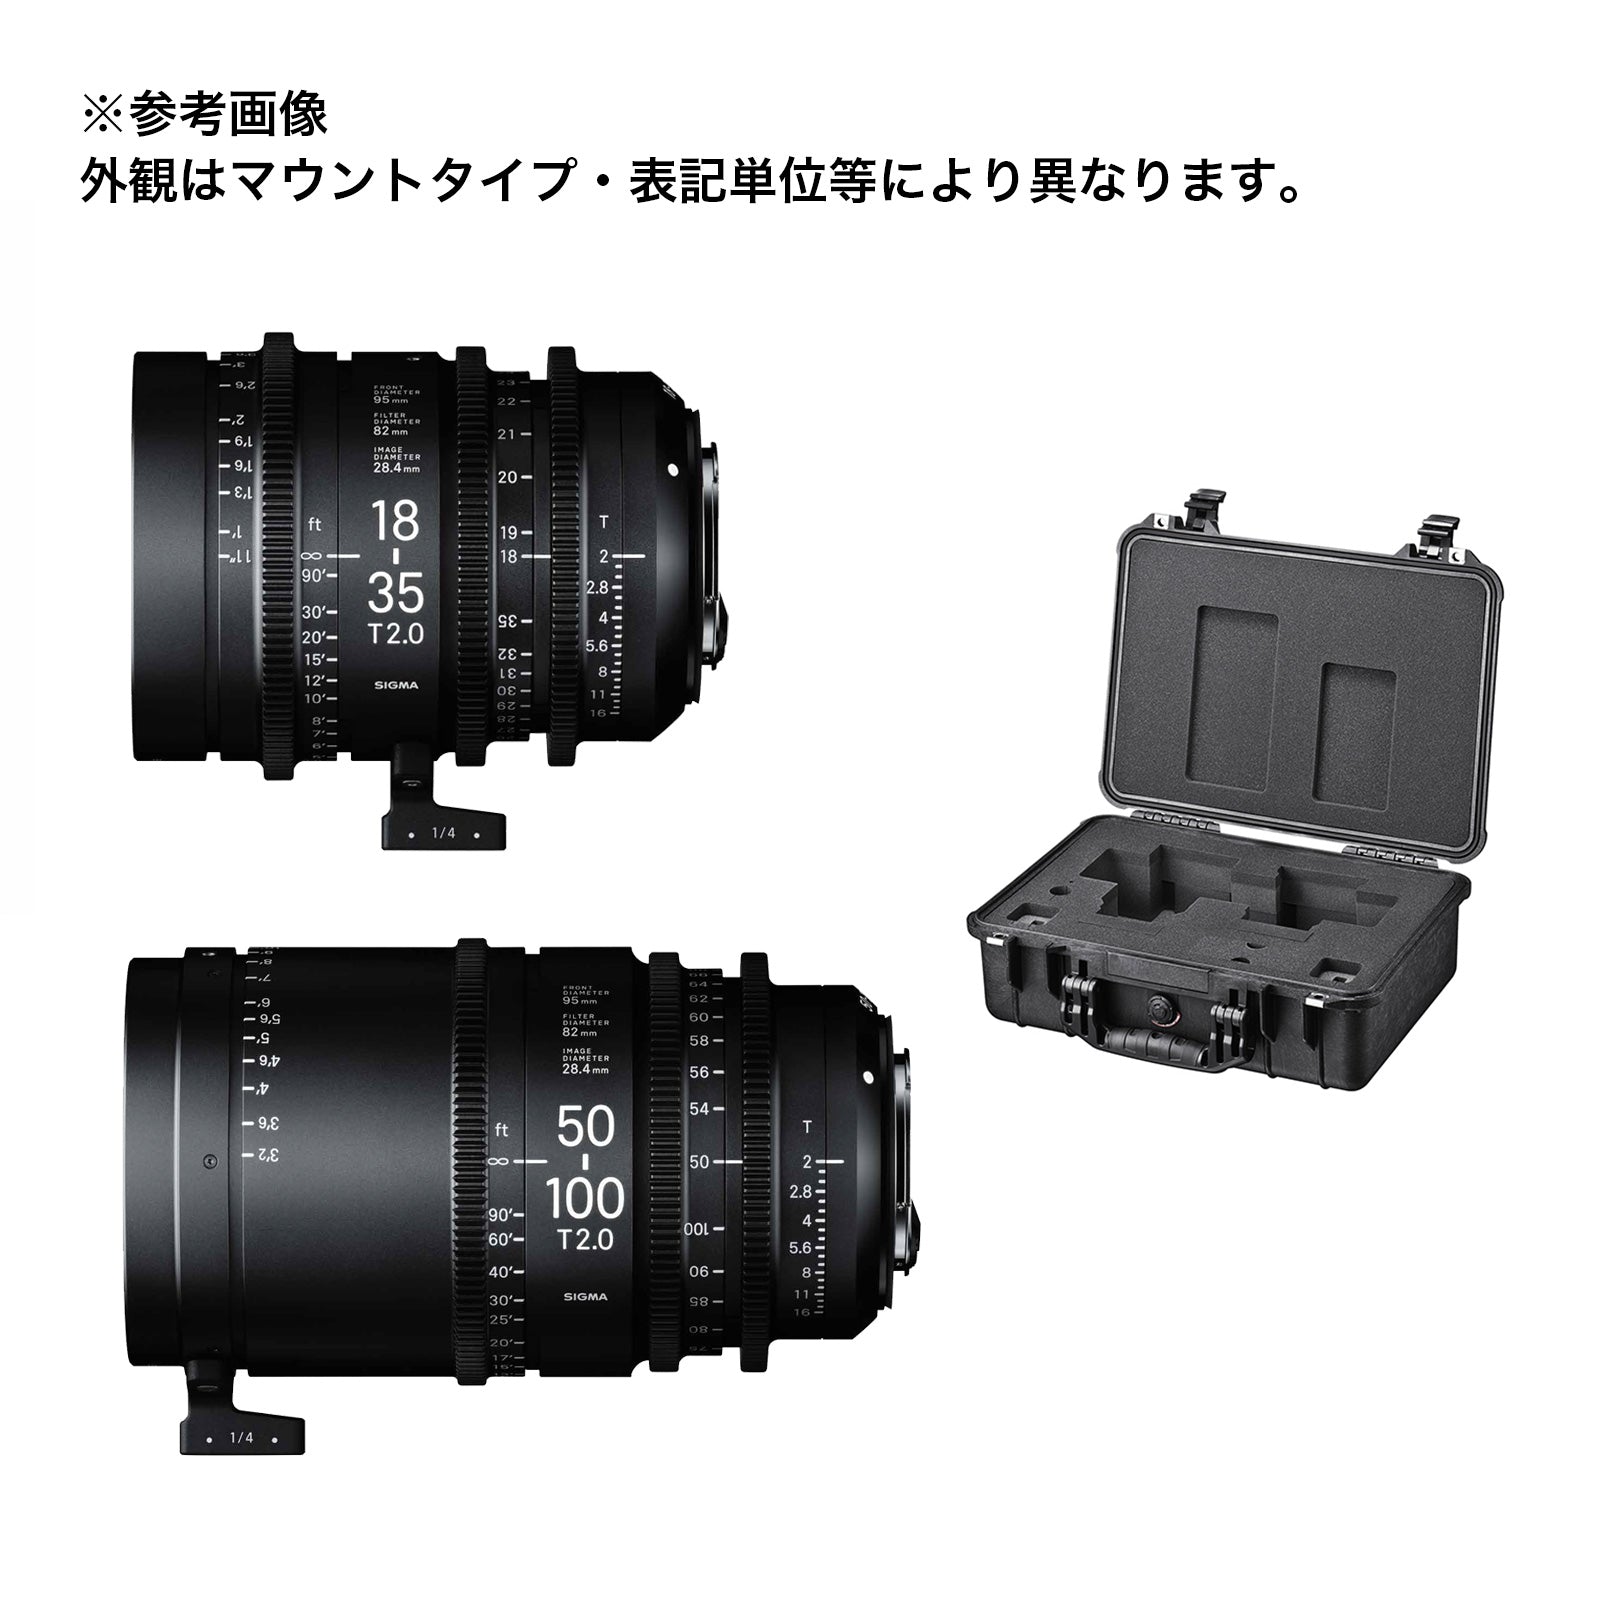 SIGMA(シグマ) CINE LENS High Speed Zoom Line 18-35mm & 50-100mm & PMC-001 kit / Eマウント メートル表記